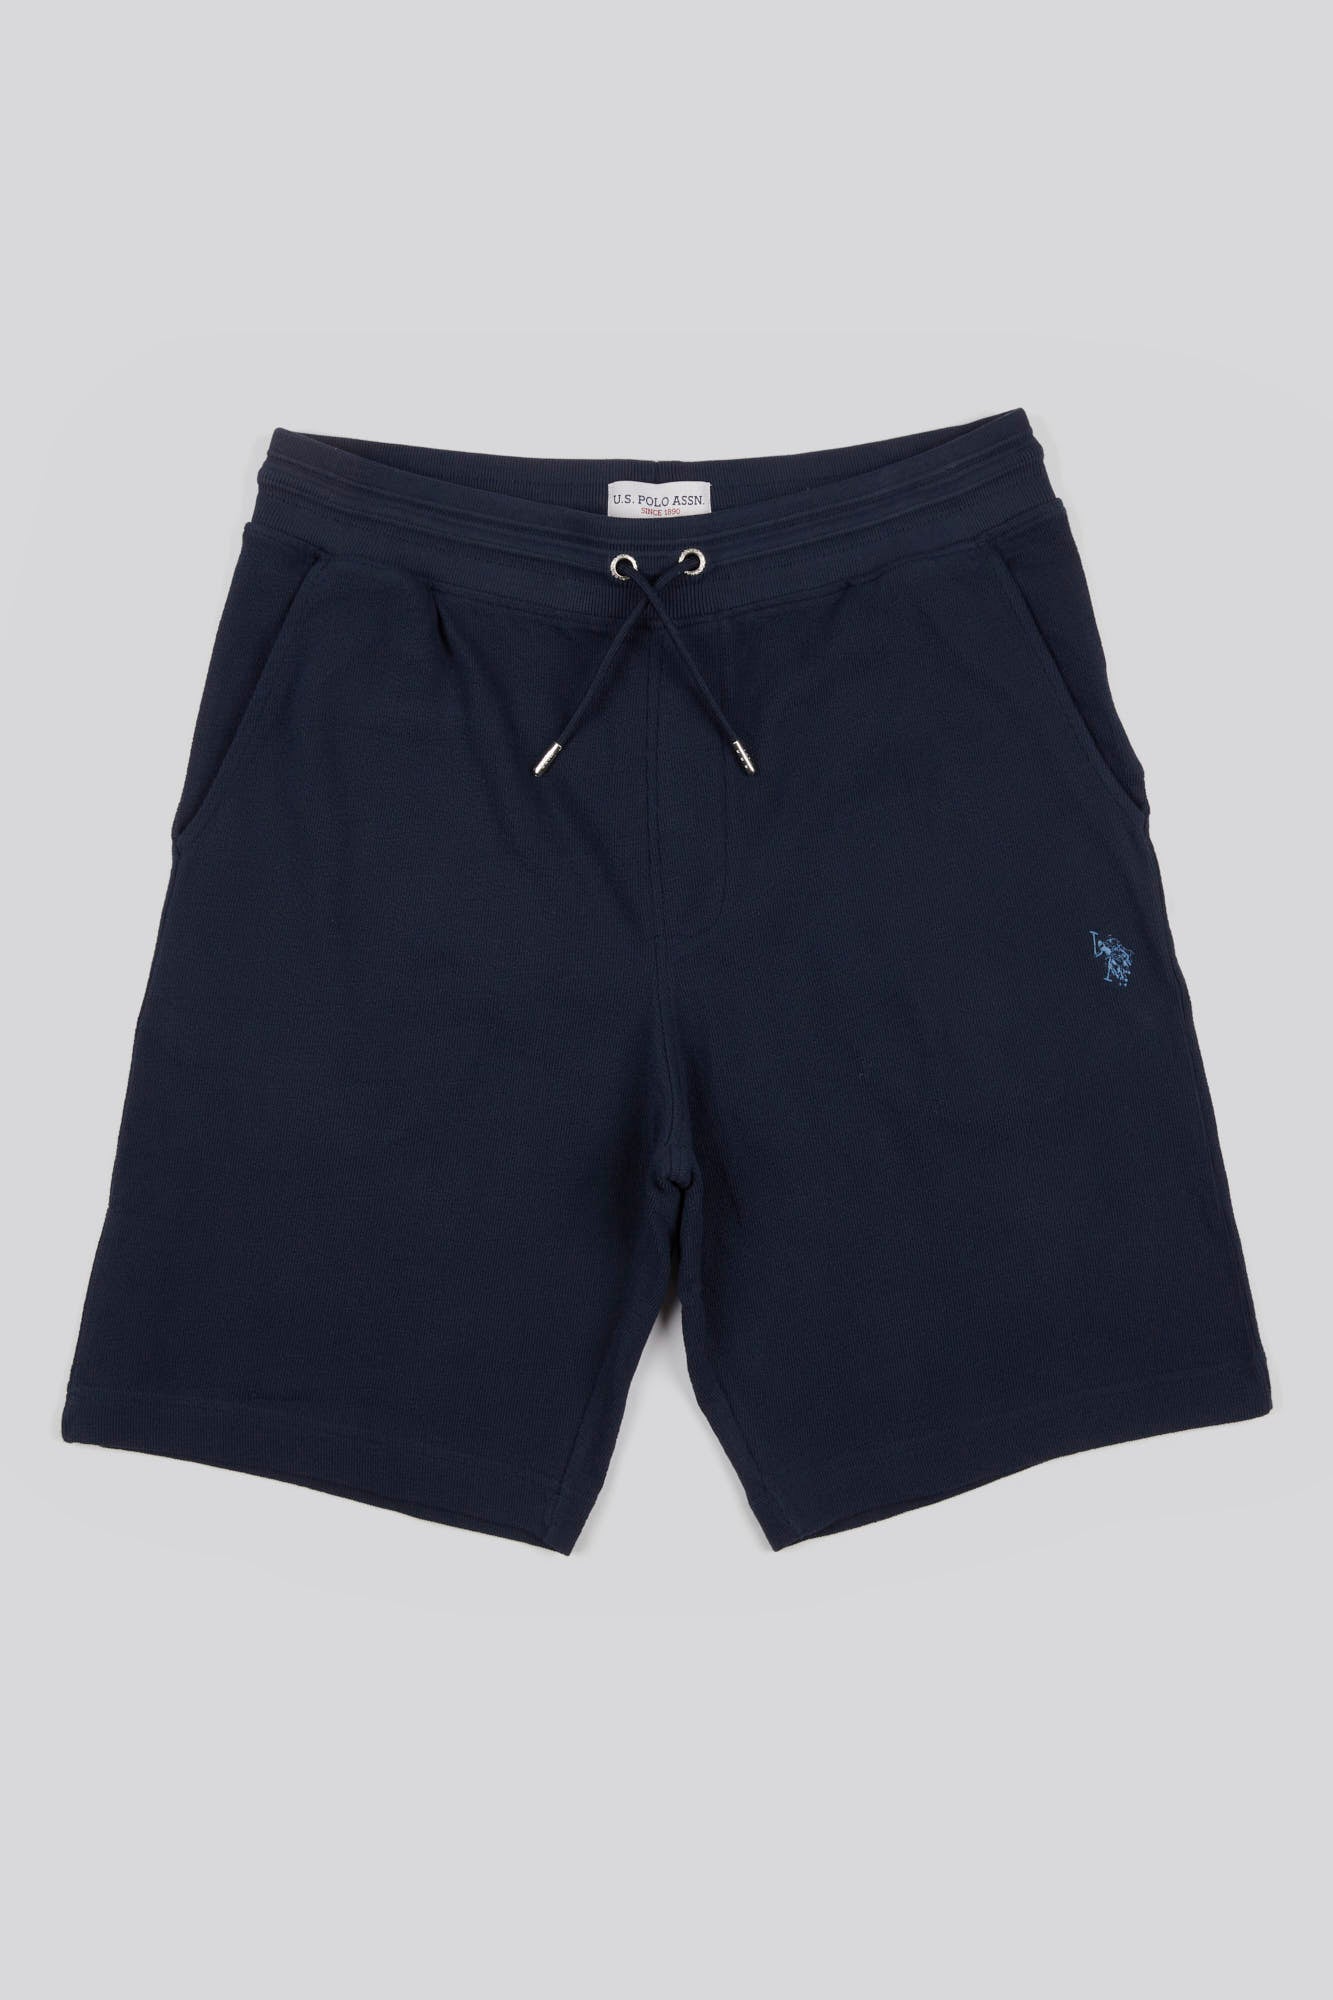 U.S. Polo Assn. Mens Classic Fit Texture Terry Shorts in Dark Sapphire Navy